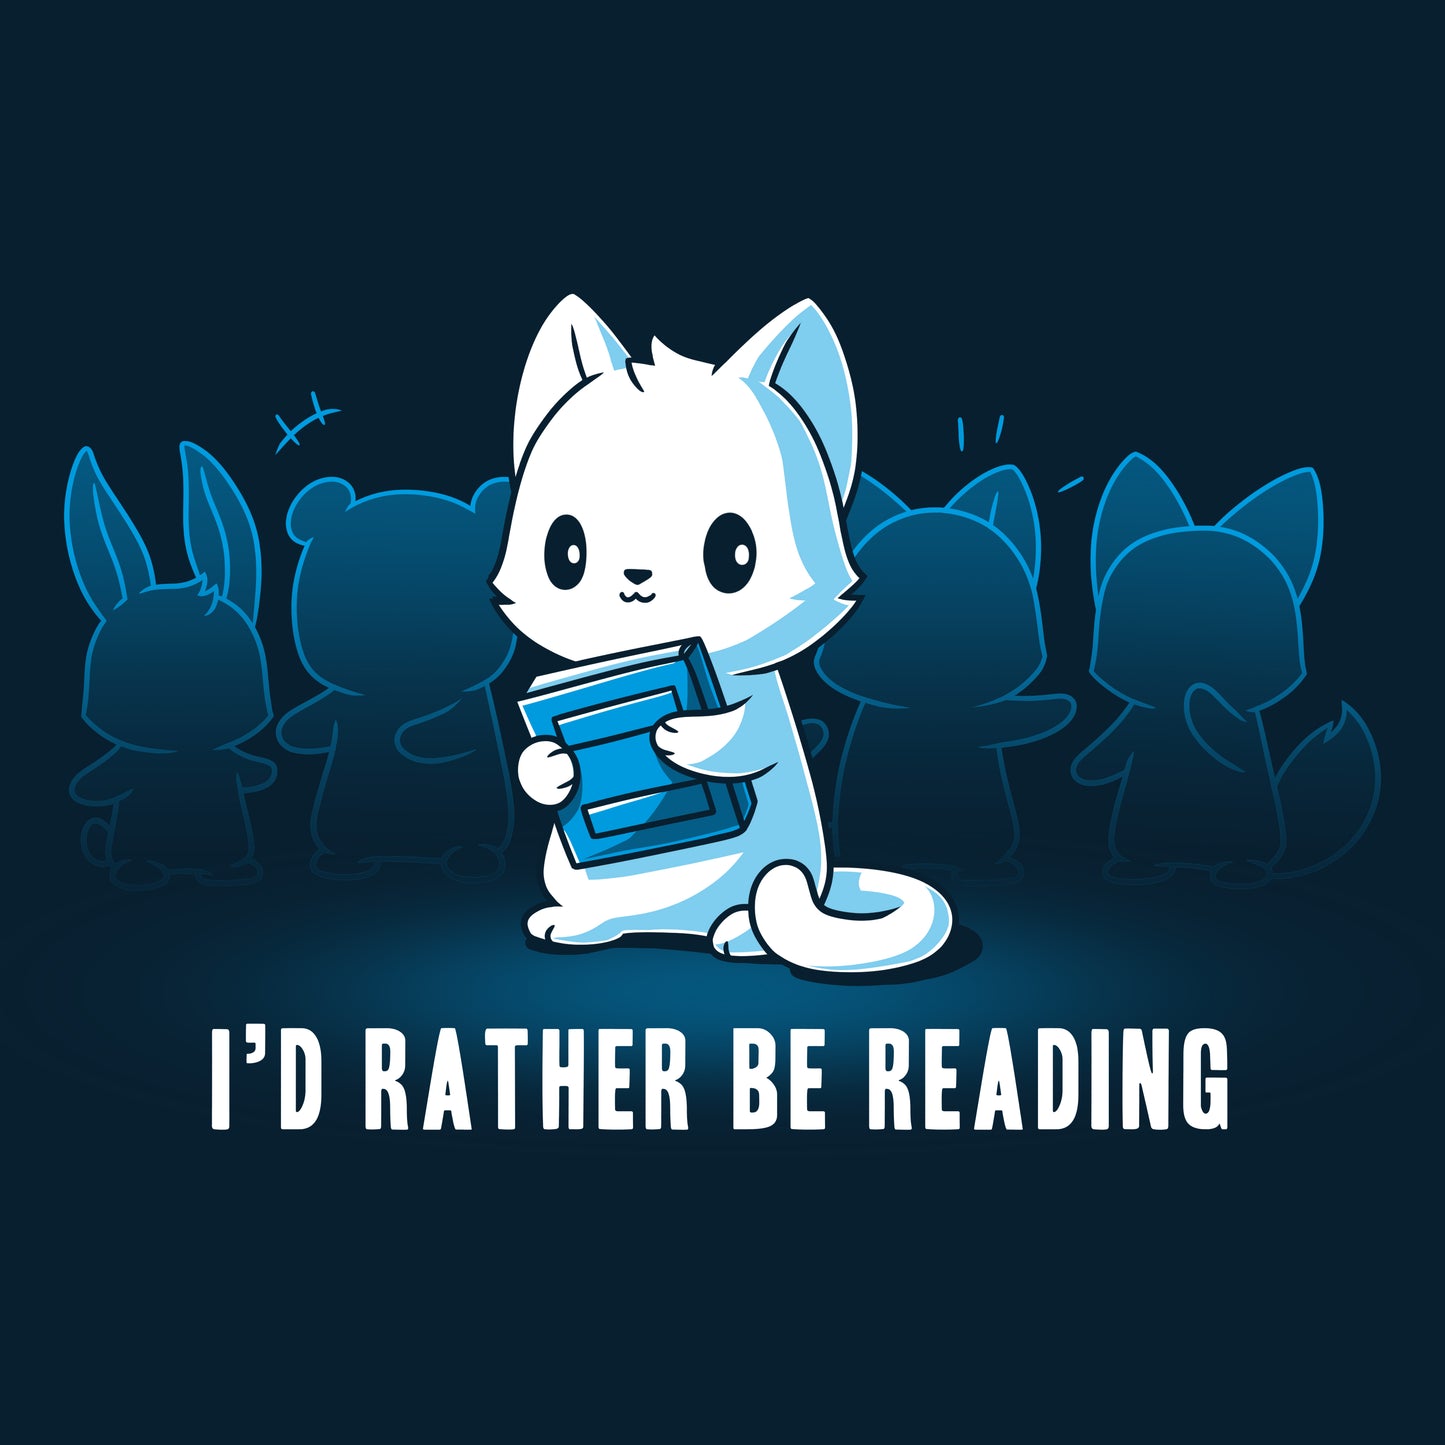 I'd rather be reading the "I'd Rather be Reading" product by TeeTurtle in comfort.